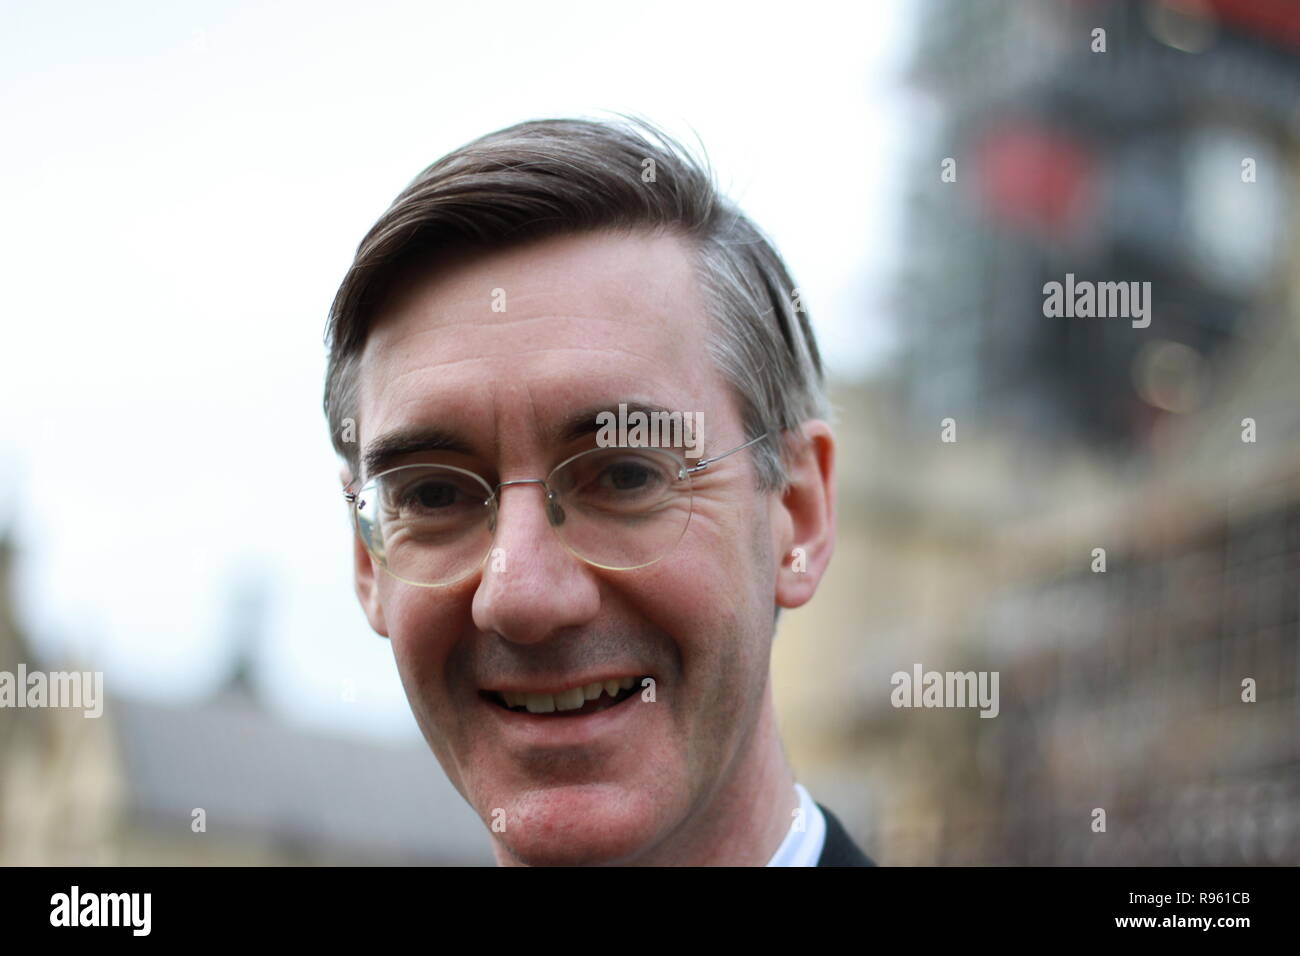 Jacob Rees-Mogg standing outside parliament, Westminster, London UK on 17th April 2018. Jacob gave his consent for these photographs to be taken. European research group. ERG. Stock Photo